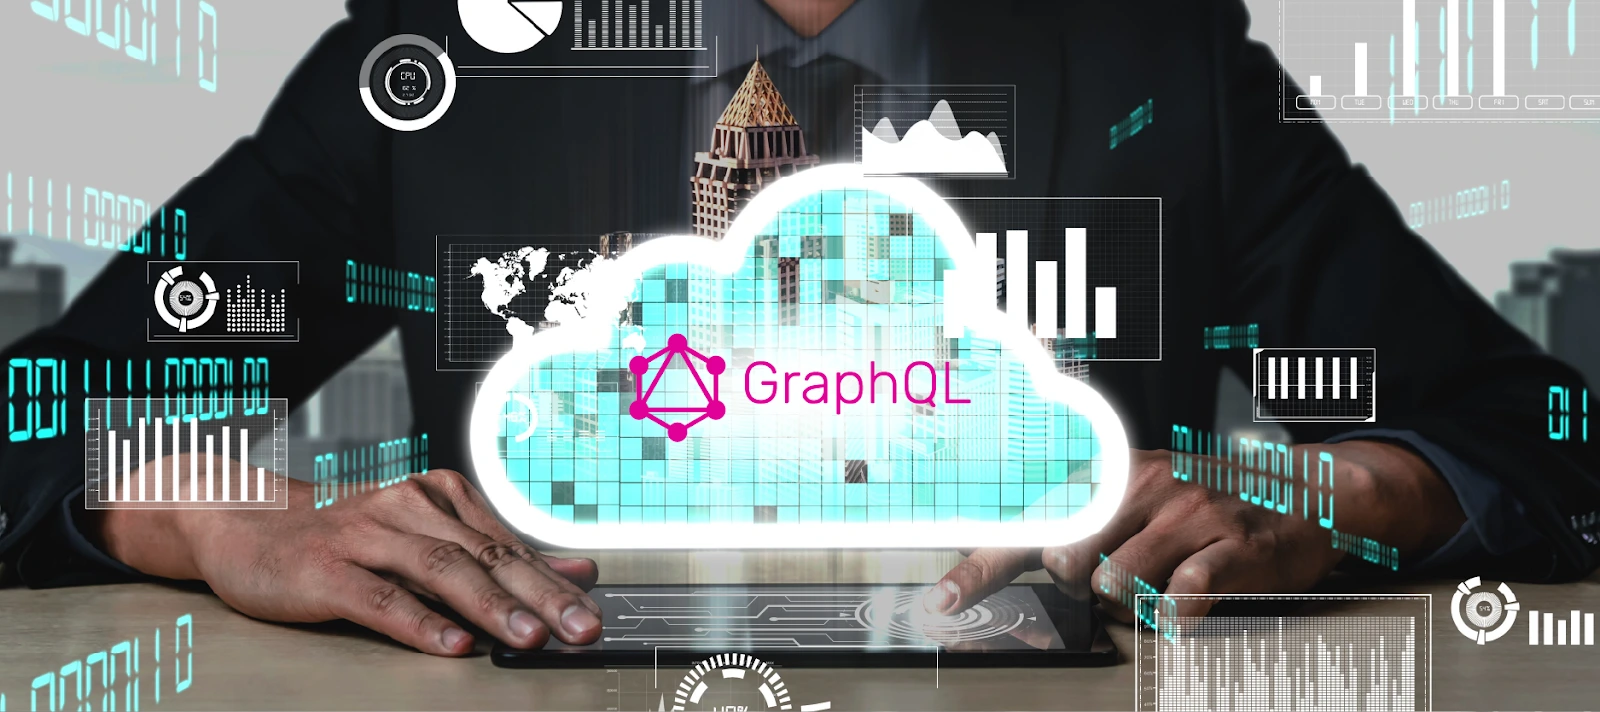 How to Solve GraphQL Latency Challenges by Deploying Closer to Your Users